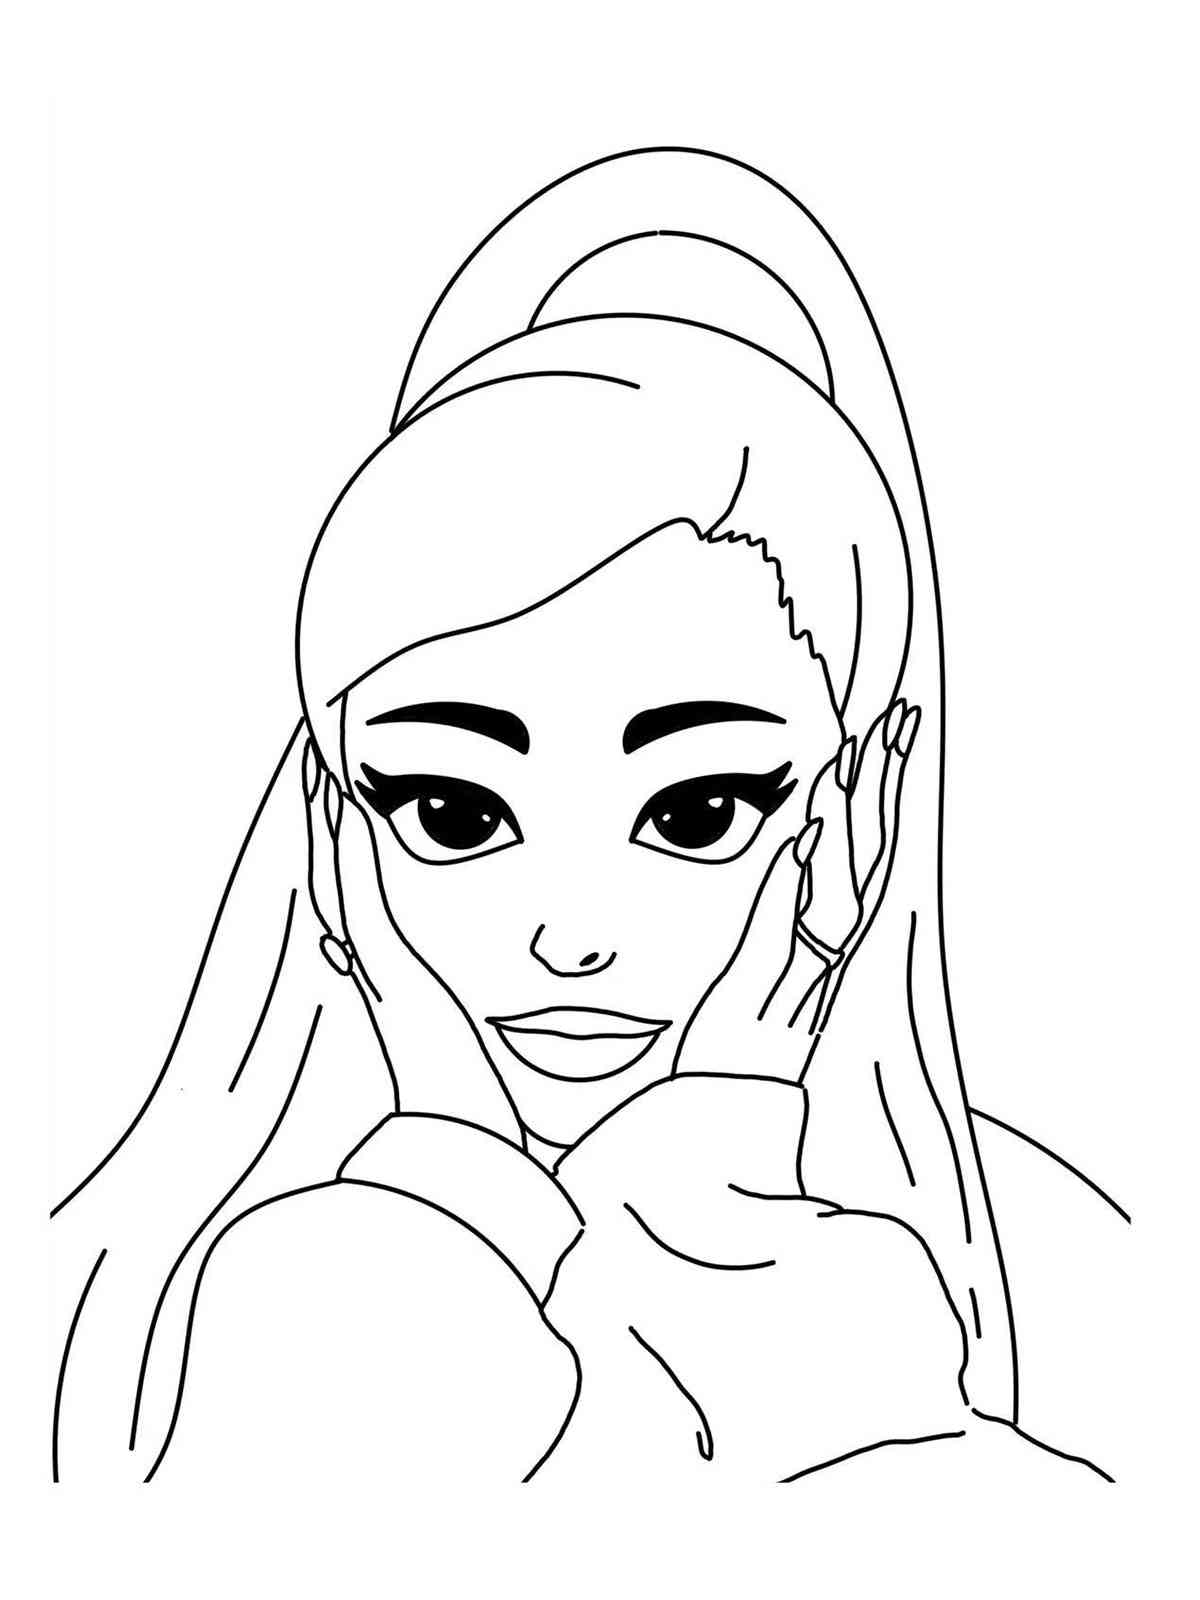 Ariana Grande coloring pages